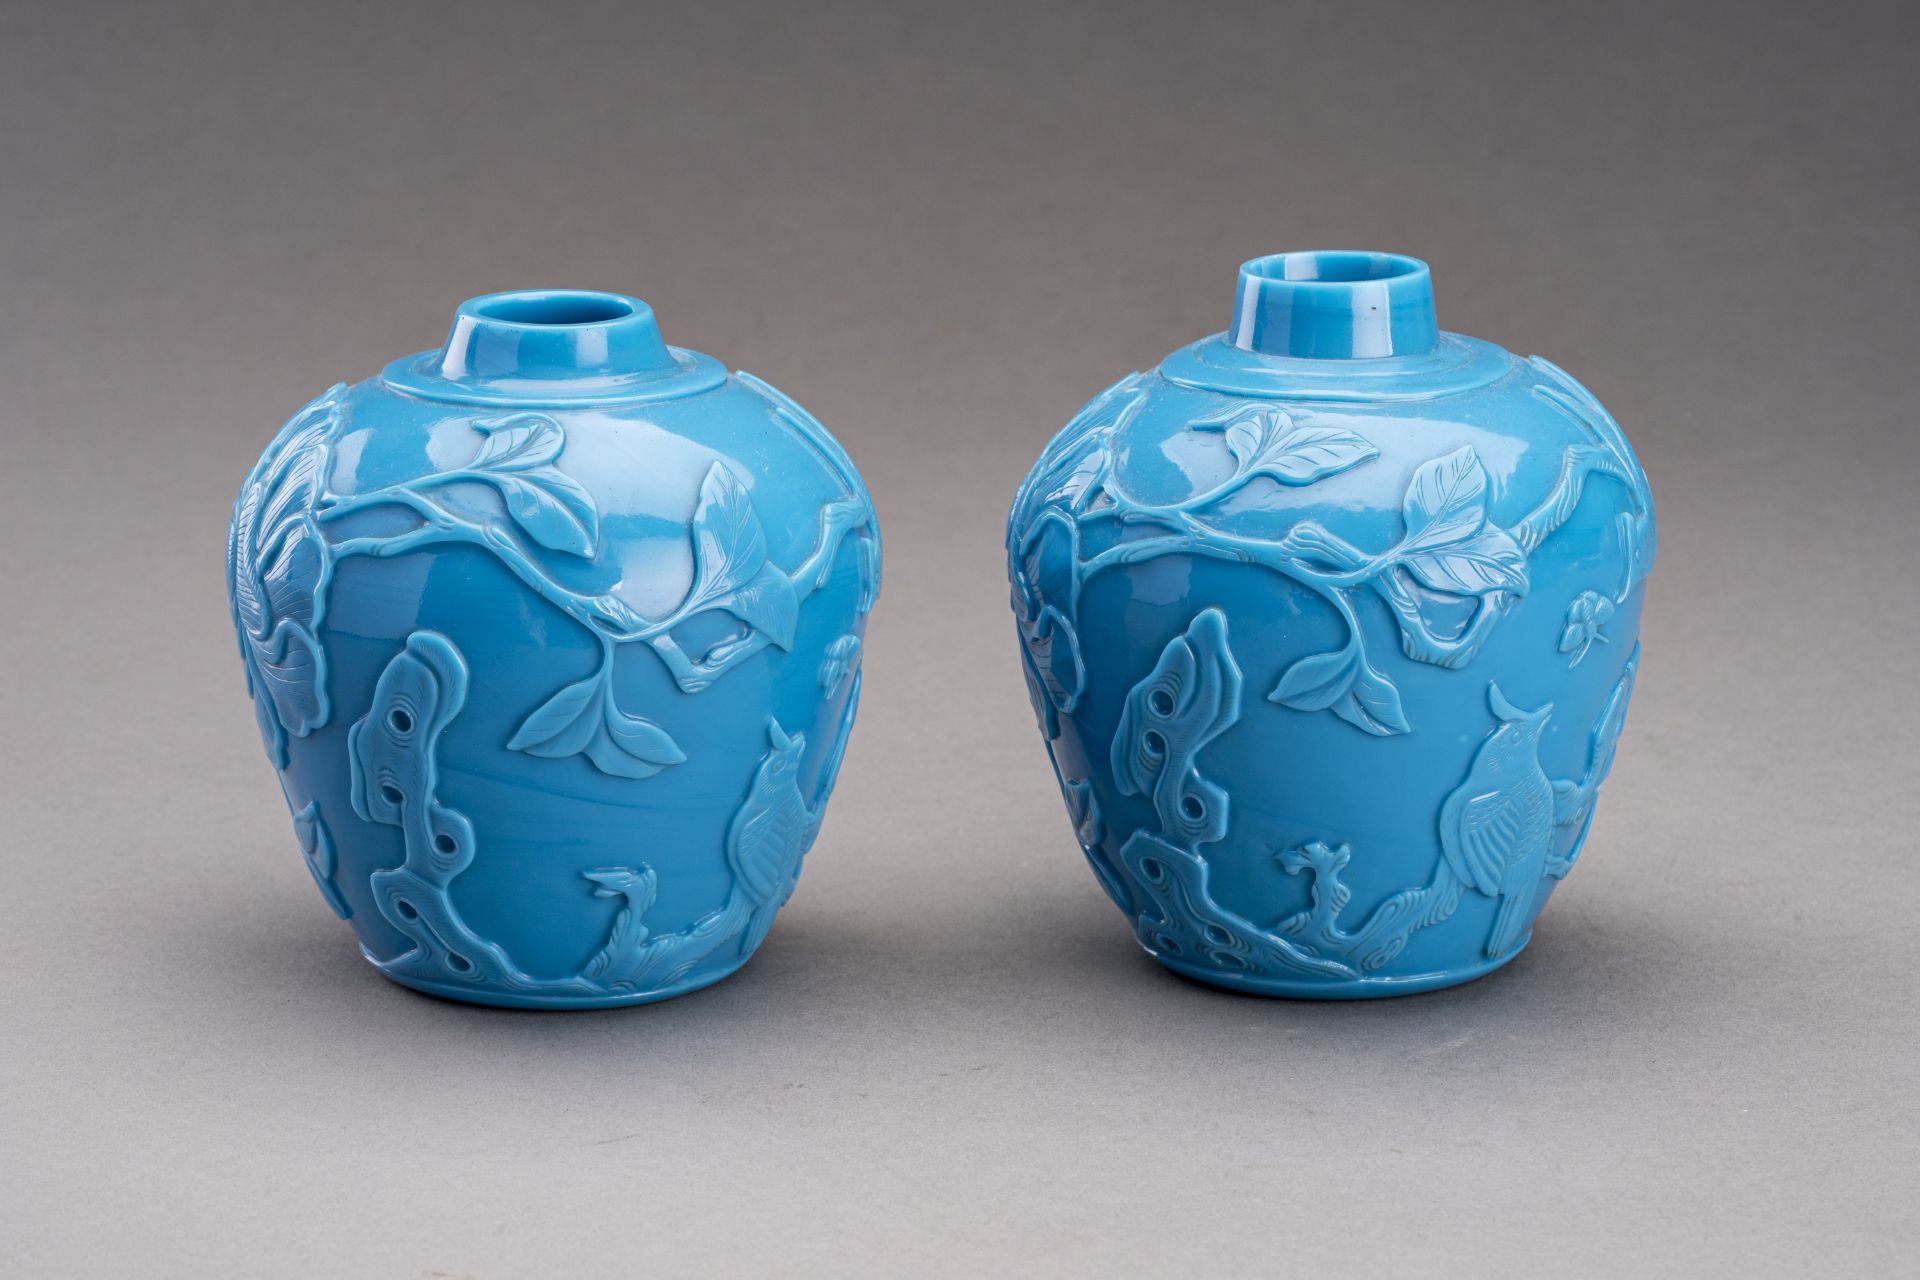 A PAIR OF PEKING GLASS VASES - Image 3 of 6